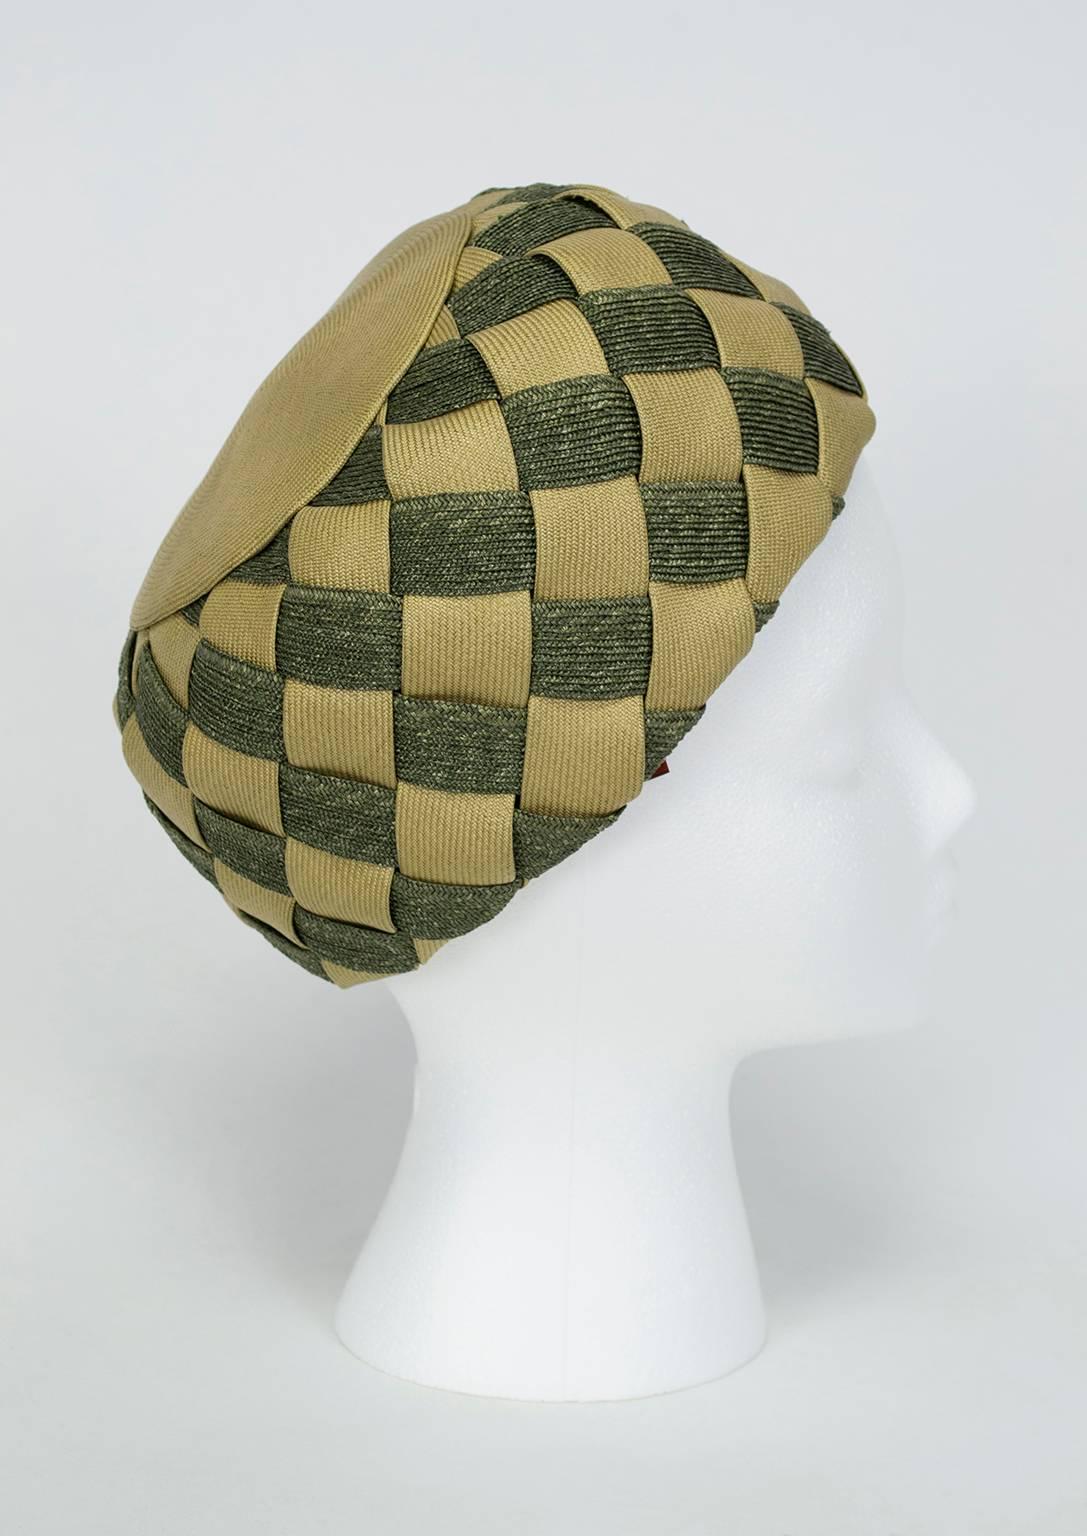 **Please note we will be out of the country April 24 - May 7, 2018 and unable to ship purchases until we return to our offices May 8.**

A perfect pillbox basket woven in two shades of green to create a checkerboard pattern; it even has interior